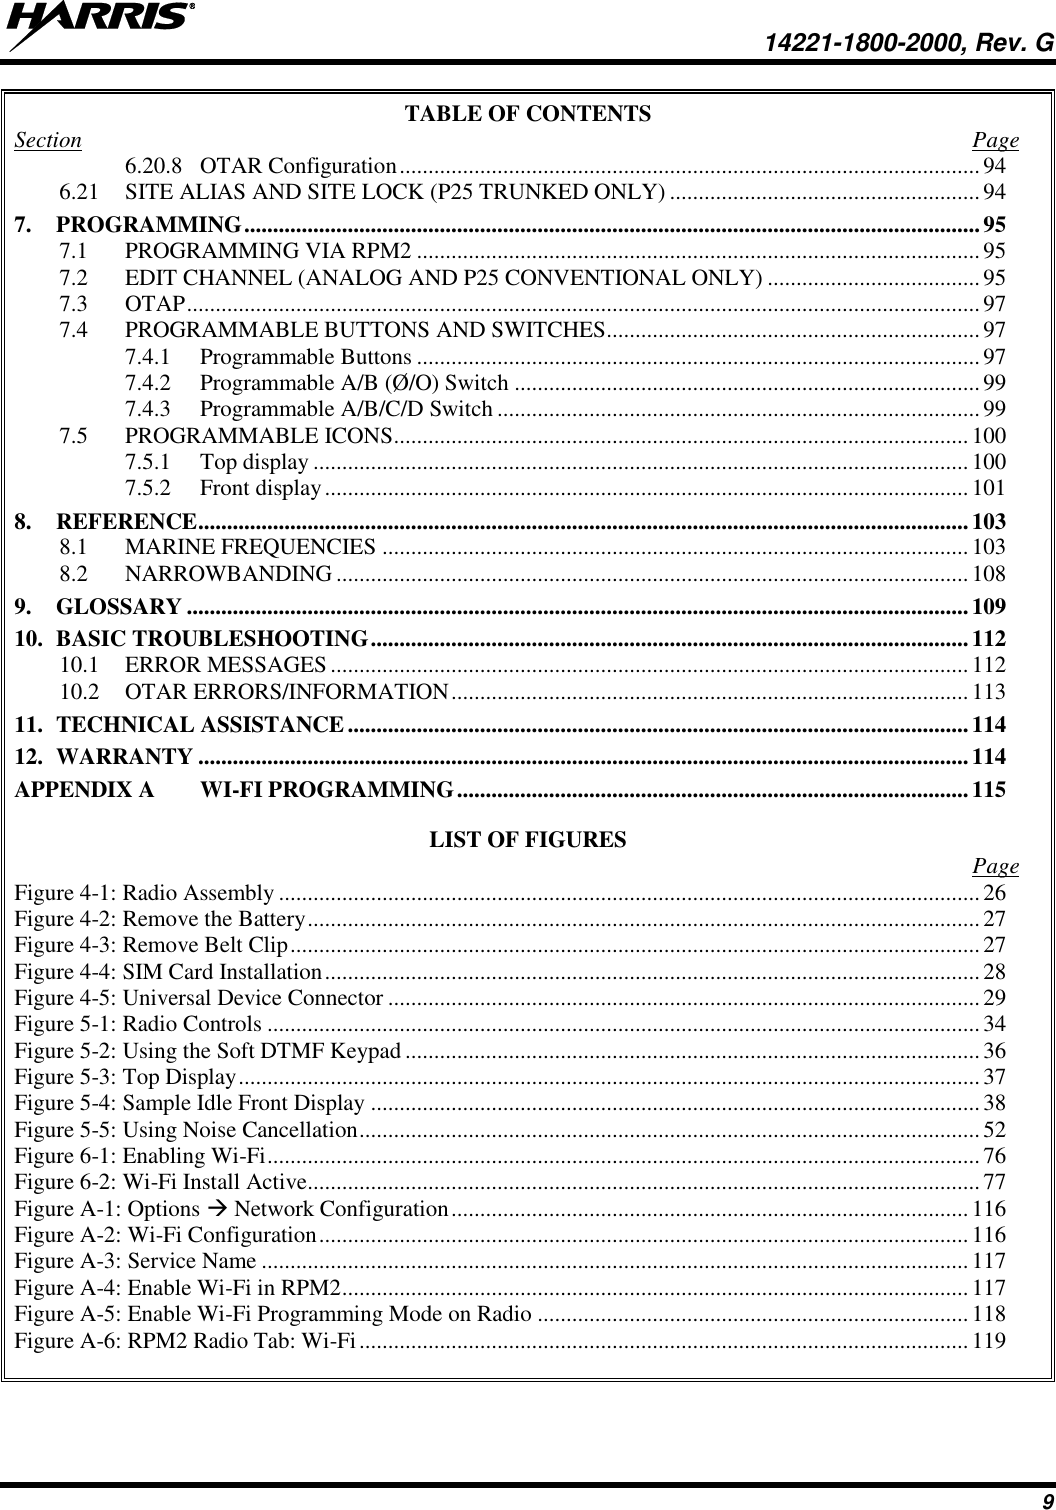   14221-1800-2000, Rev. G 9 TABLE OF CONTENTS Section  Page 6.20.8 OTAR Configuration ..................................................................................................... 94 6.21 SITE ALIAS AND SITE LOCK (P25 TRUNKED ONLY) ...................................................... 94 7. PROGRAMMING ................................................................................................................................ 95 7.1 PROGRAMMING VIA RPM2 .................................................................................................. 95 7.2 EDIT CHANNEL (ANALOG AND P25 CONVENTIONAL ONLY) ..................................... 95 7.3 OTAP .......................................................................................................................................... 97 7.4 PROGRAMMABLE BUTTONS AND SWITCHES ................................................................. 97 7.4.1 Programmable Buttons .................................................................................................. 97 7.4.2 Programmable A/B (Ø/O) Switch ................................................................................. 99 7.4.3 Programmable A/B/C/D Switch .................................................................................... 99 7.5 PROGRAMMABLE ICONS .................................................................................................... 100 7.5.1 Top display .................................................................................................................. 100 7.5.2 Front display ................................................................................................................ 101 8. REFERENCE ...................................................................................................................................... 103 8.1 MARINE FREQUENCIES ...................................................................................................... 103 8.2 NARROWBANDING .............................................................................................................. 108 9. GLOSSARY ........................................................................................................................................ 109 10. BASIC TROUBLESHOOTING ........................................................................................................ 112 10.1 ERROR MESSAGES ............................................................................................................... 112 10.2 OTAR ERRORS/INFORMATION .......................................................................................... 113 11. TECHNICAL ASSISTANCE ............................................................................................................ 114 12. WARRANTY ...................................................................................................................................... 114 APPENDIX A WI-FI PROGRAMMING ......................................................................................... 115  LIST OF FIGURES   Page Figure 4-1: Radio Assembly .......................................................................................................................... 26 Figure 4-2: Remove the Battery ..................................................................................................................... 27 Figure 4-3: Remove Belt Clip ........................................................................................................................ 27 Figure 4-4: SIM Card Installation .................................................................................................................. 28 Figure 4-5: Universal Device Connector ....................................................................................................... 29 Figure 5-1: Radio Controls ............................................................................................................................ 34 Figure 5-2: Using the Soft DTMF Keypad .................................................................................................... 36 Figure 5-3: Top Display ................................................................................................................................. 37 Figure 5-4: Sample Idle Front Display .......................................................................................................... 38 Figure 5-5: Using Noise Cancellation ............................................................................................................ 52 Figure 6-1: Enabling Wi-Fi ............................................................................................................................ 76 Figure 6-2: Wi-Fi Install Active ..................................................................................................................... 77 Figure A-1: Options  Network Configuration .......................................................................................... 116 Figure A-2: Wi-Fi Configuration ................................................................................................................. 116 Figure A-3: Service Name ........................................................................................................................... 117 Figure A-4: Enable Wi-Fi in RPM2 ............................................................................................................. 117 Figure A-5: Enable Wi-Fi Programming Mode on Radio ........................................................................... 118 Figure A-6: RPM2 Radio Tab: Wi-Fi .......................................................................................................... 119  